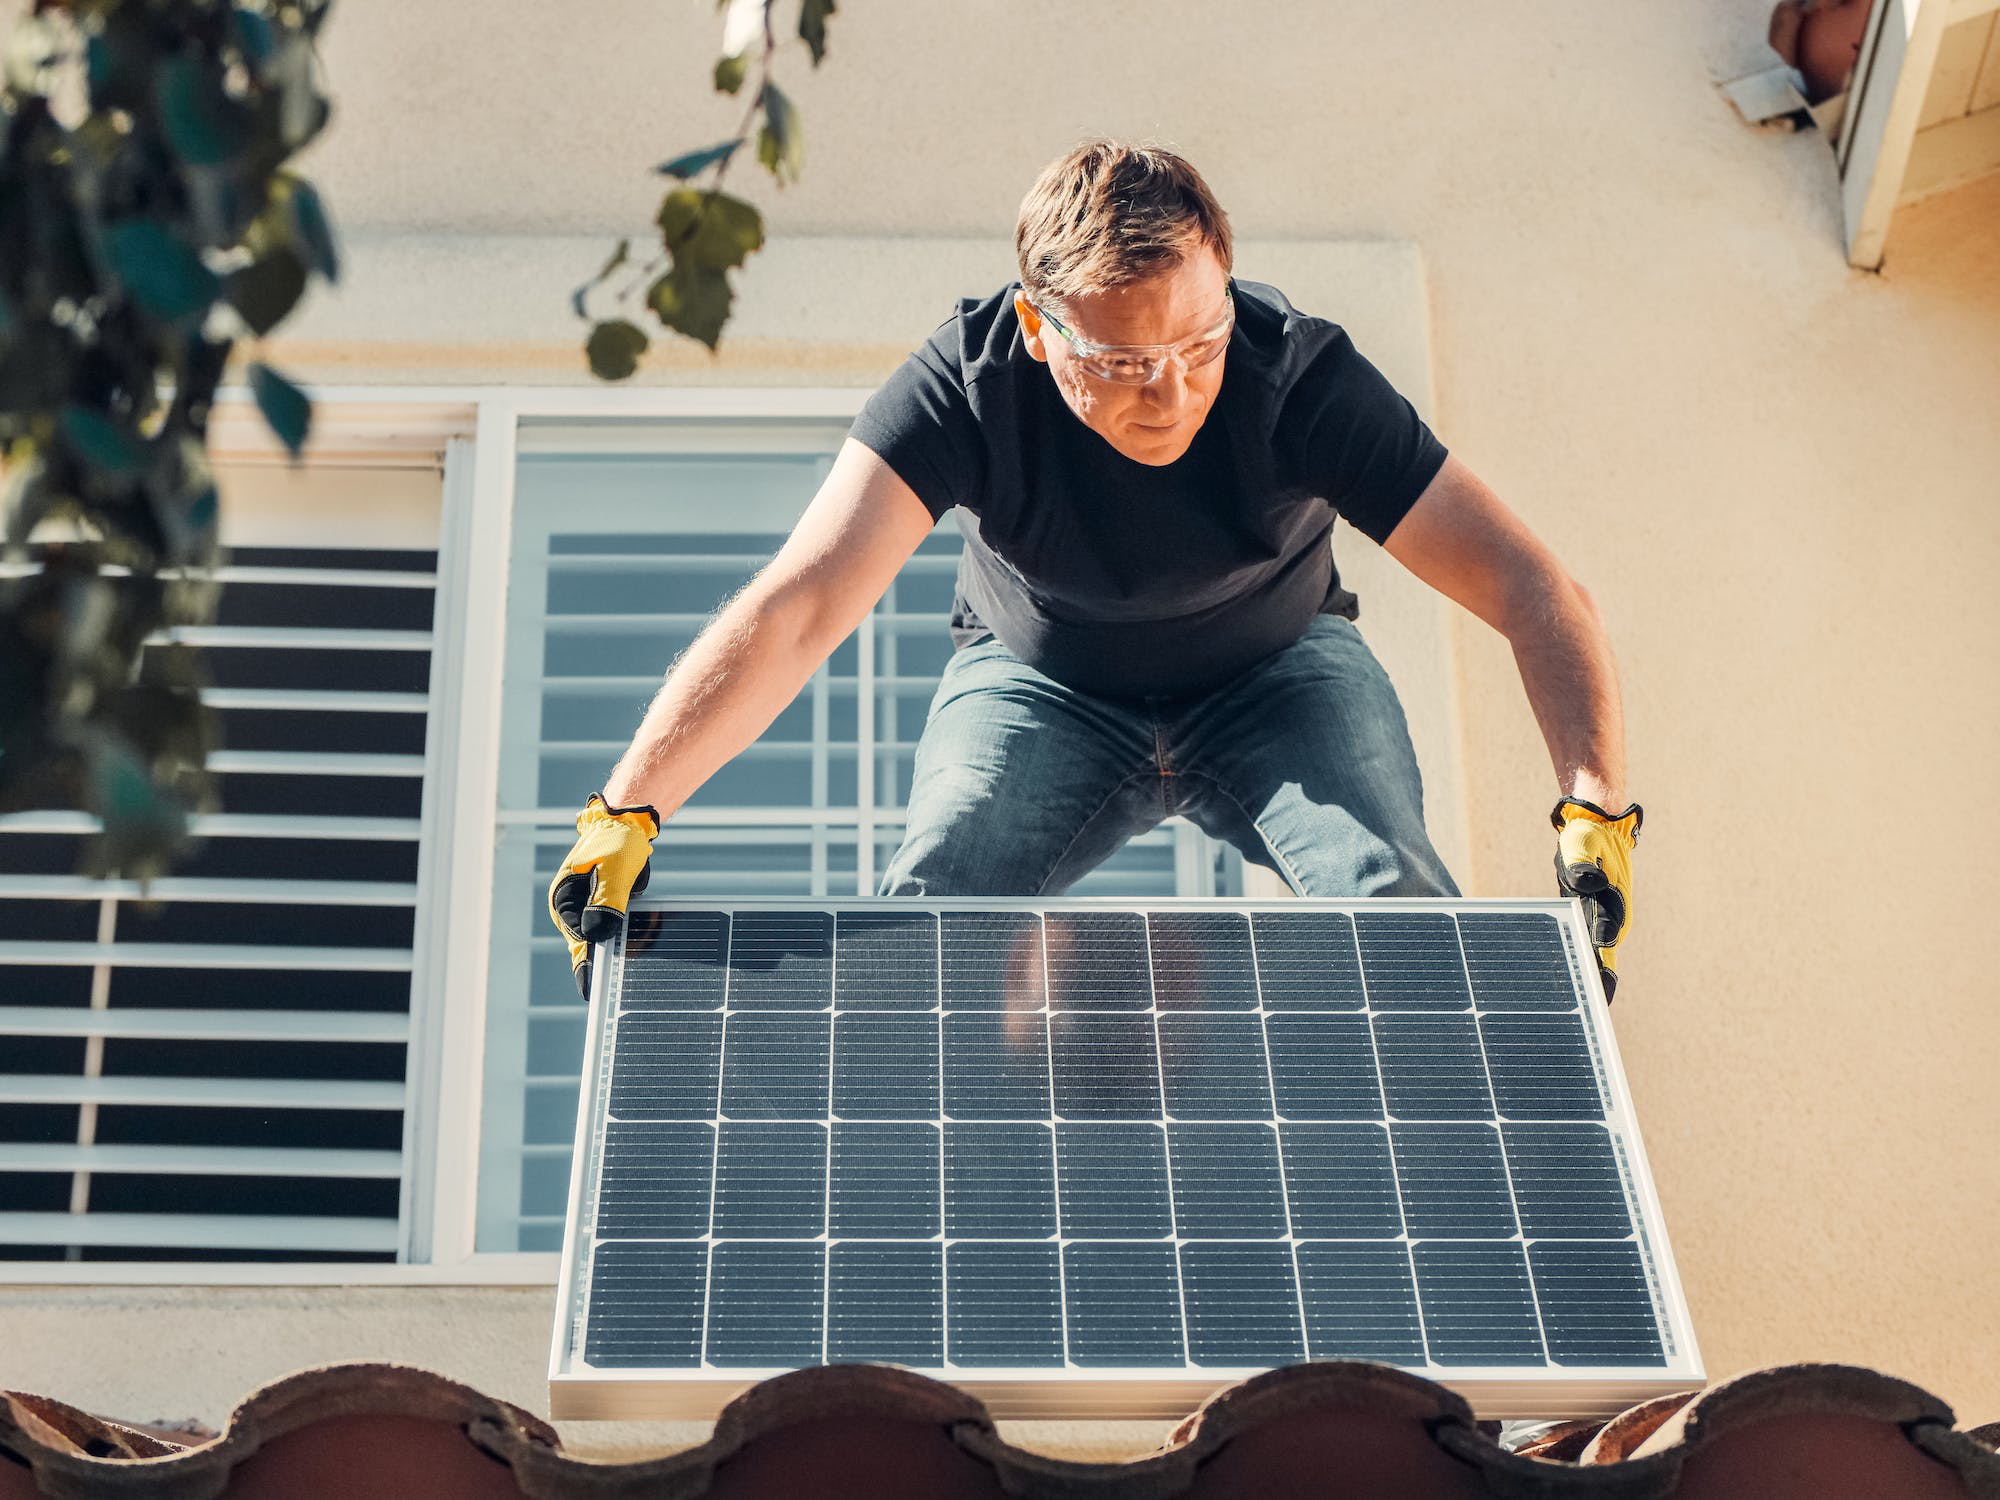 Man holding a solar panel on a roof